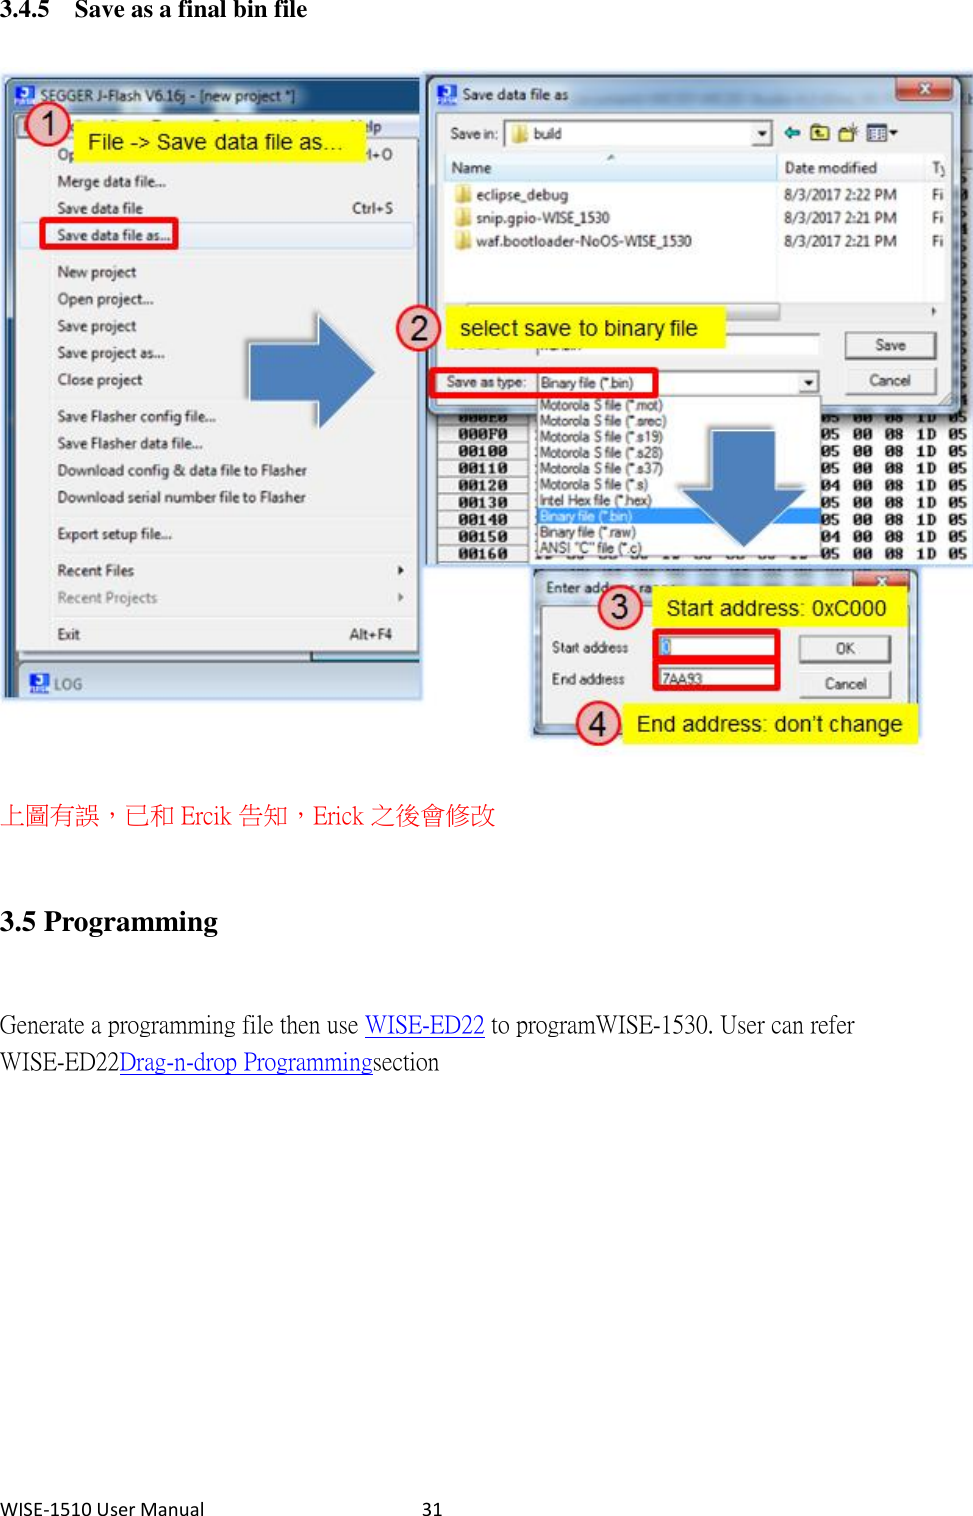 WISE-1510 User Manual  31 3.4.5 Save as a final bin file  上圖有誤，已和 Ercik 告知，Erick 之後會修改 3.5 Programming  Generate a programming file then use WISE-ED22 to program WISE-1530. User can refer WISE-ED22 Drag-n-drop Programming section  